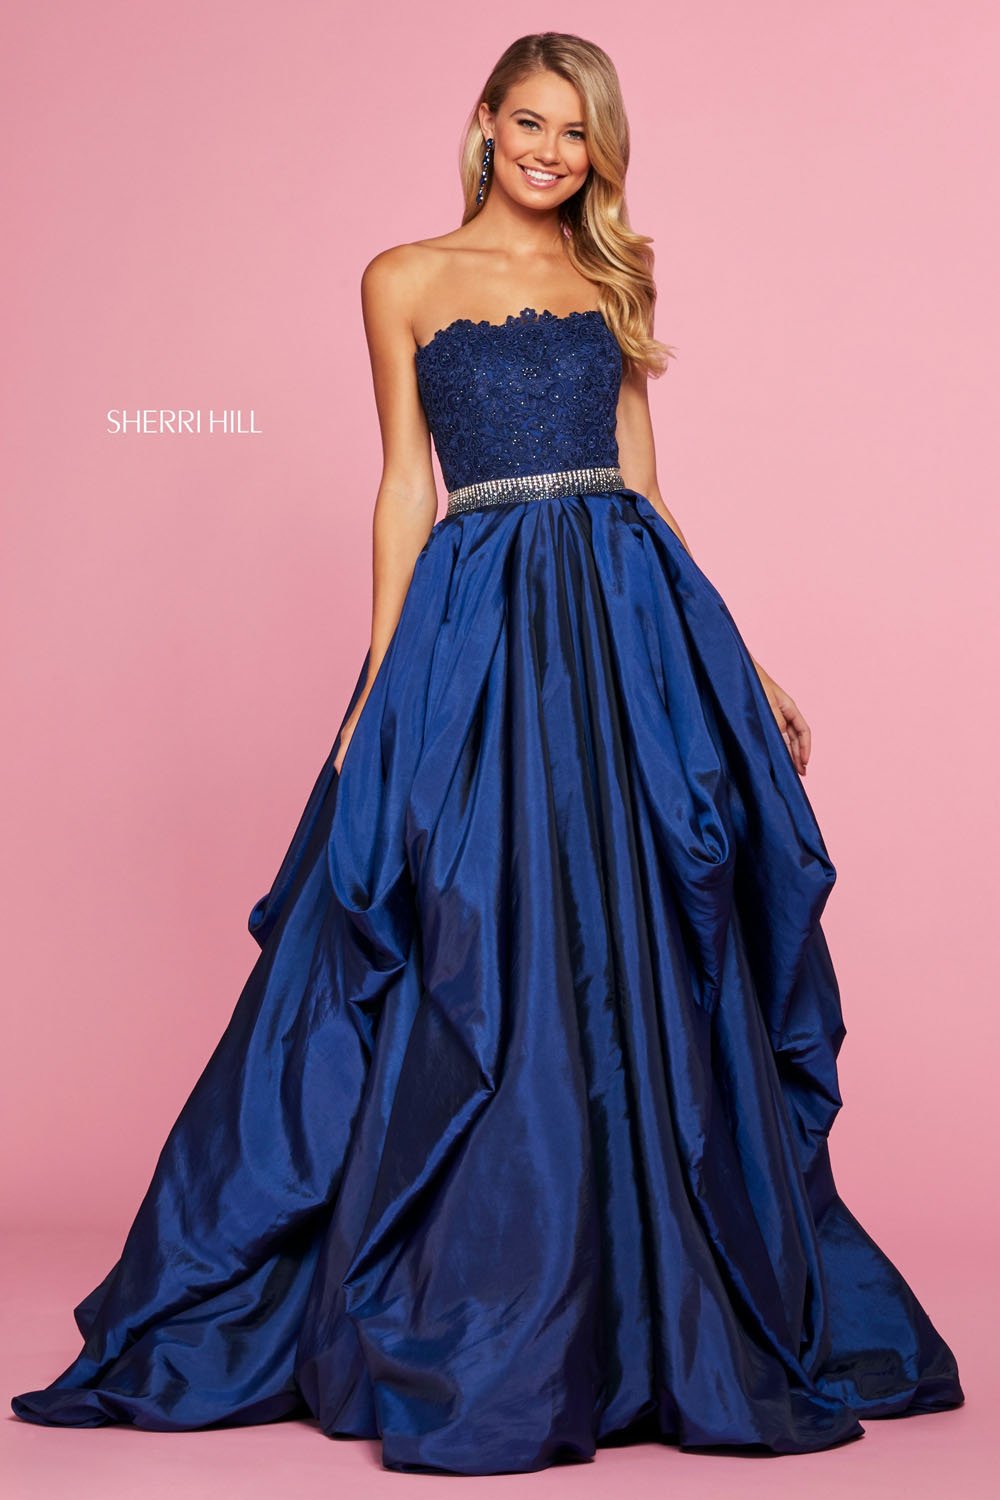 Sherri Hill 53339 dress images in these colors: Ivory, Red, Navy, Black, Yellow.